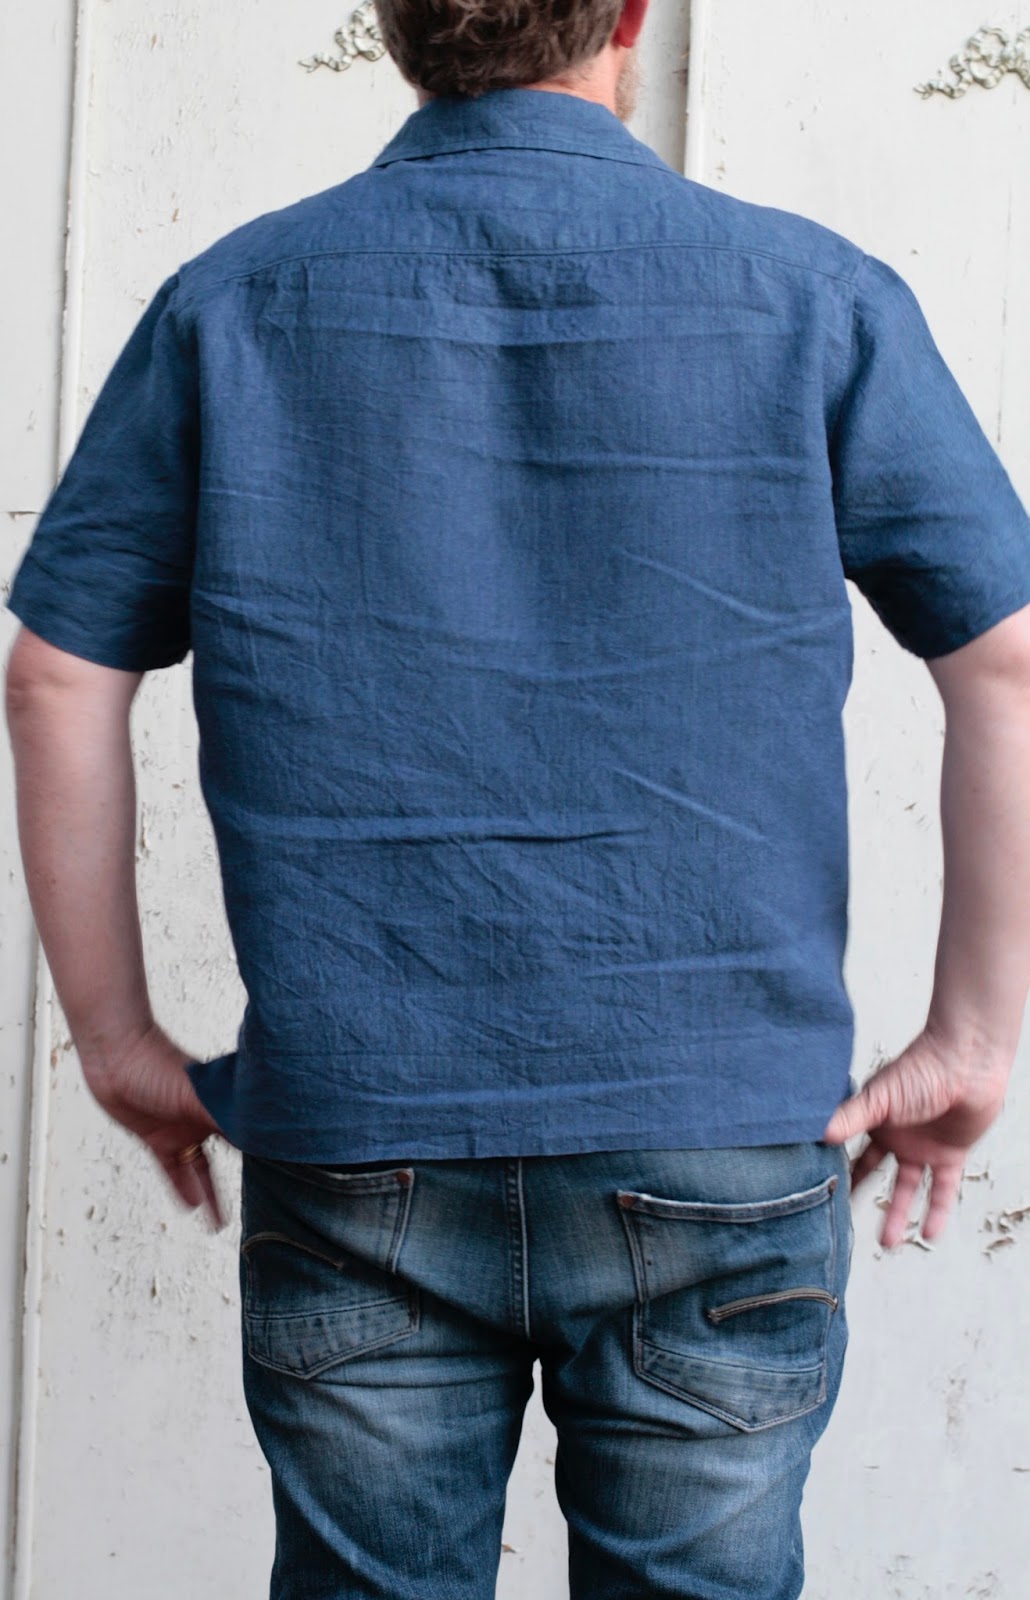 THE DRAPERY: Merchant & Mills All State shirt in Washed Linen